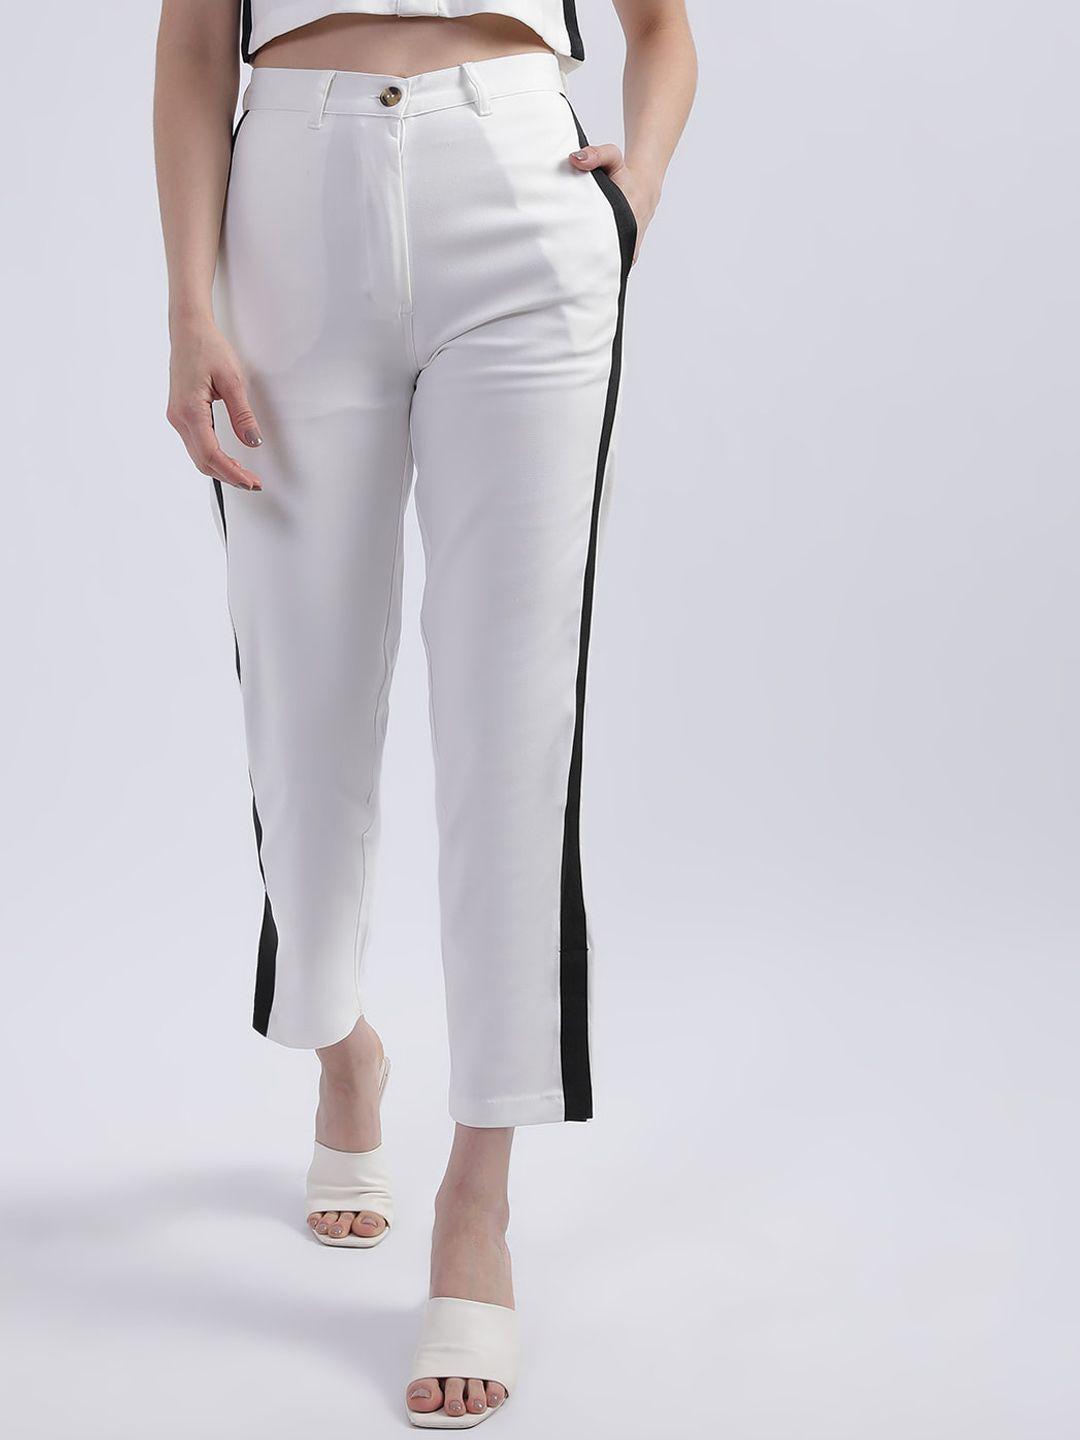 centrestage women off white high-rise trousers